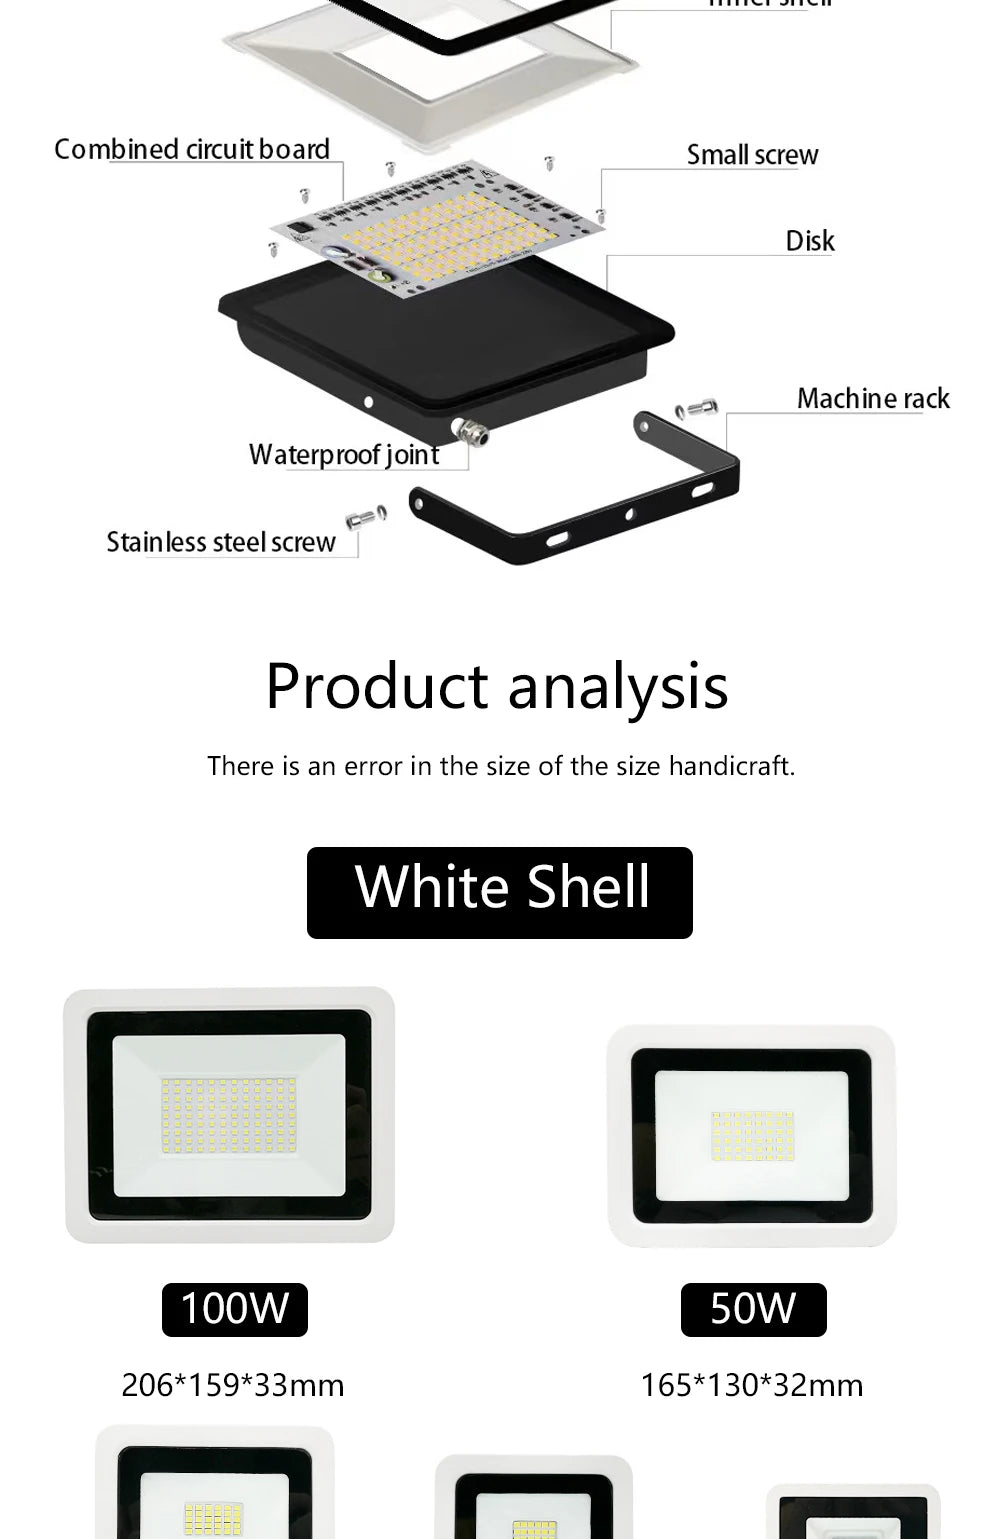 Waterproof LED flood light for outdoor use, with various wattage options and a durable design.